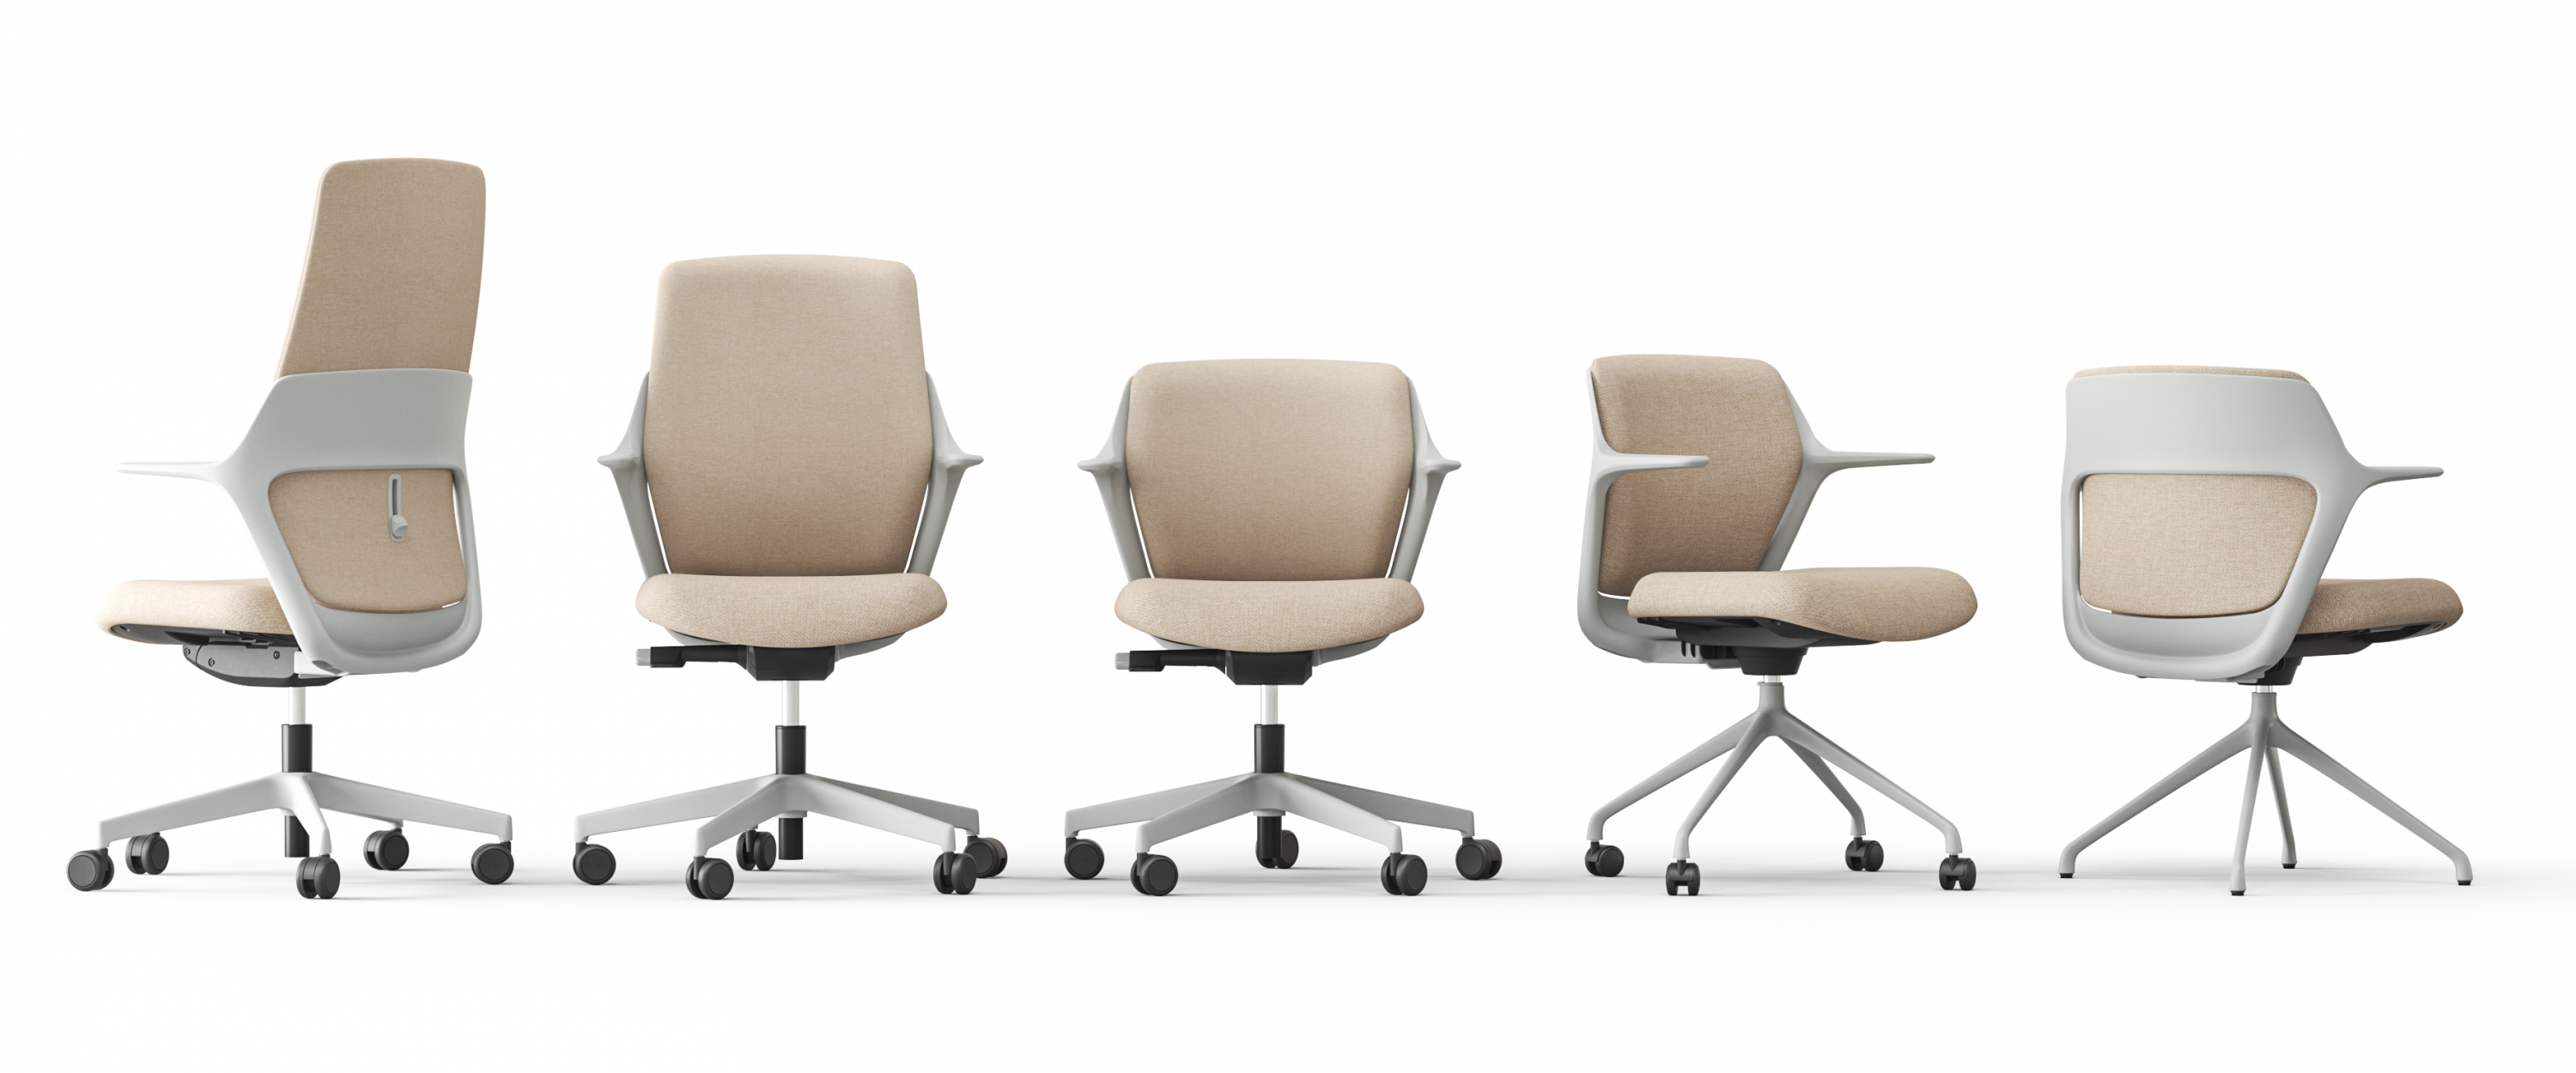 Three OFY chairs designed by Alegre Design for Narbutas, shown from different angles. The chairs feature ergonomic design, beige fabric finishes, and adjustable lumbar support, ideal for modern office settings